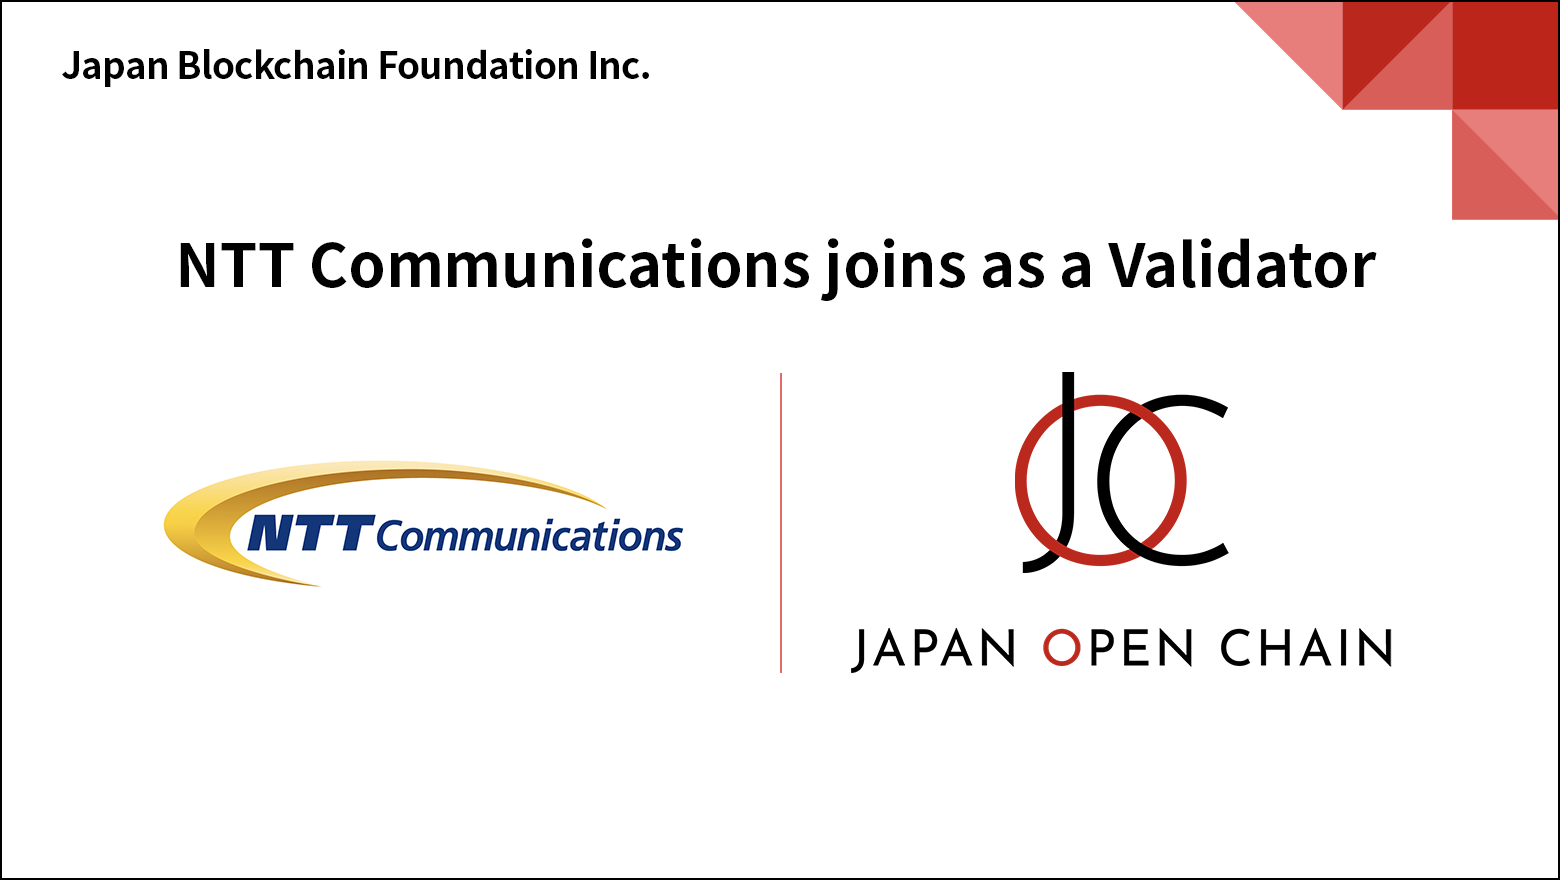 NTT Communications Joins Japan Open Chain as a Validator (Blockchain Co-operator)